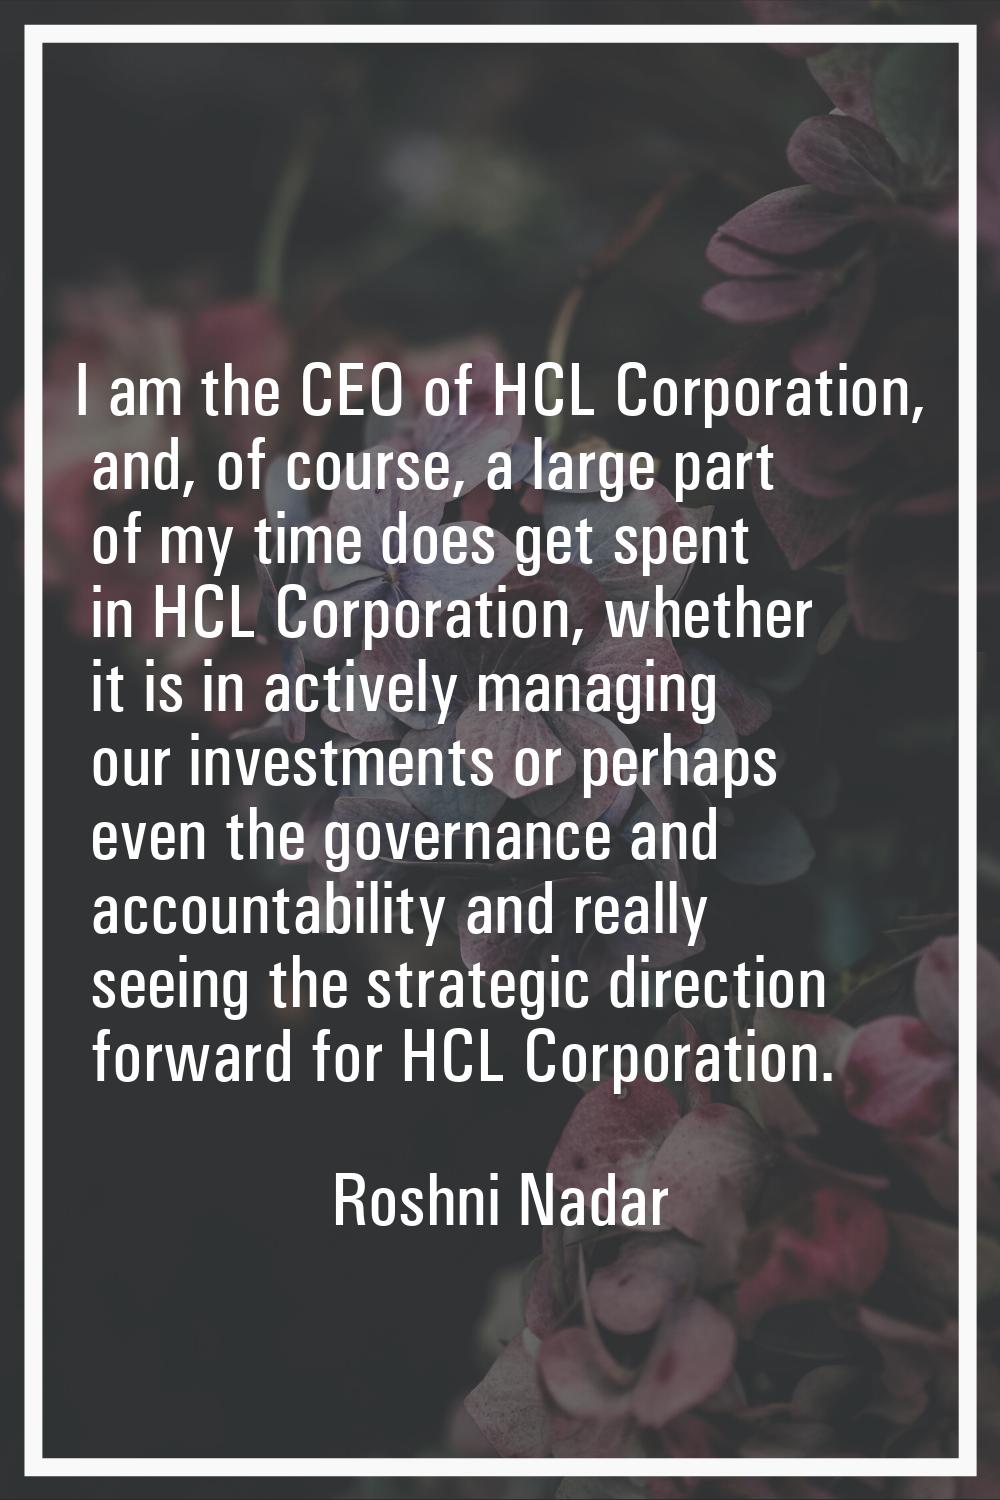 I am the CEO of HCL Corporation, and, of course, a large part of my time does get spent in HCL Corp